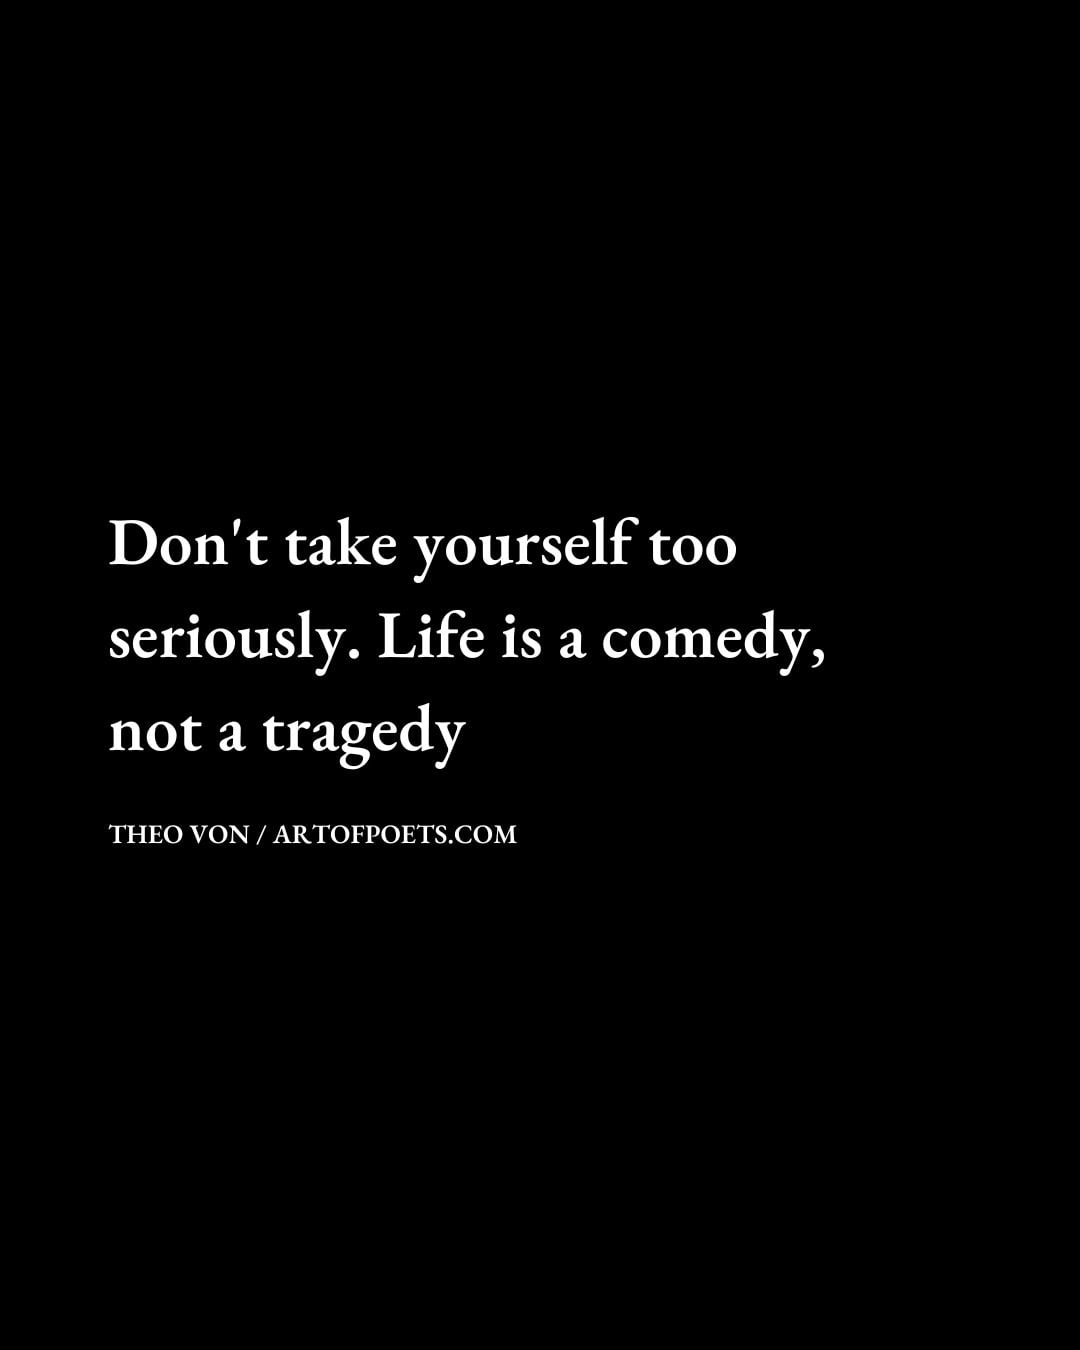 Dont take yourself too seriously. Life is a comedy not a tragedy